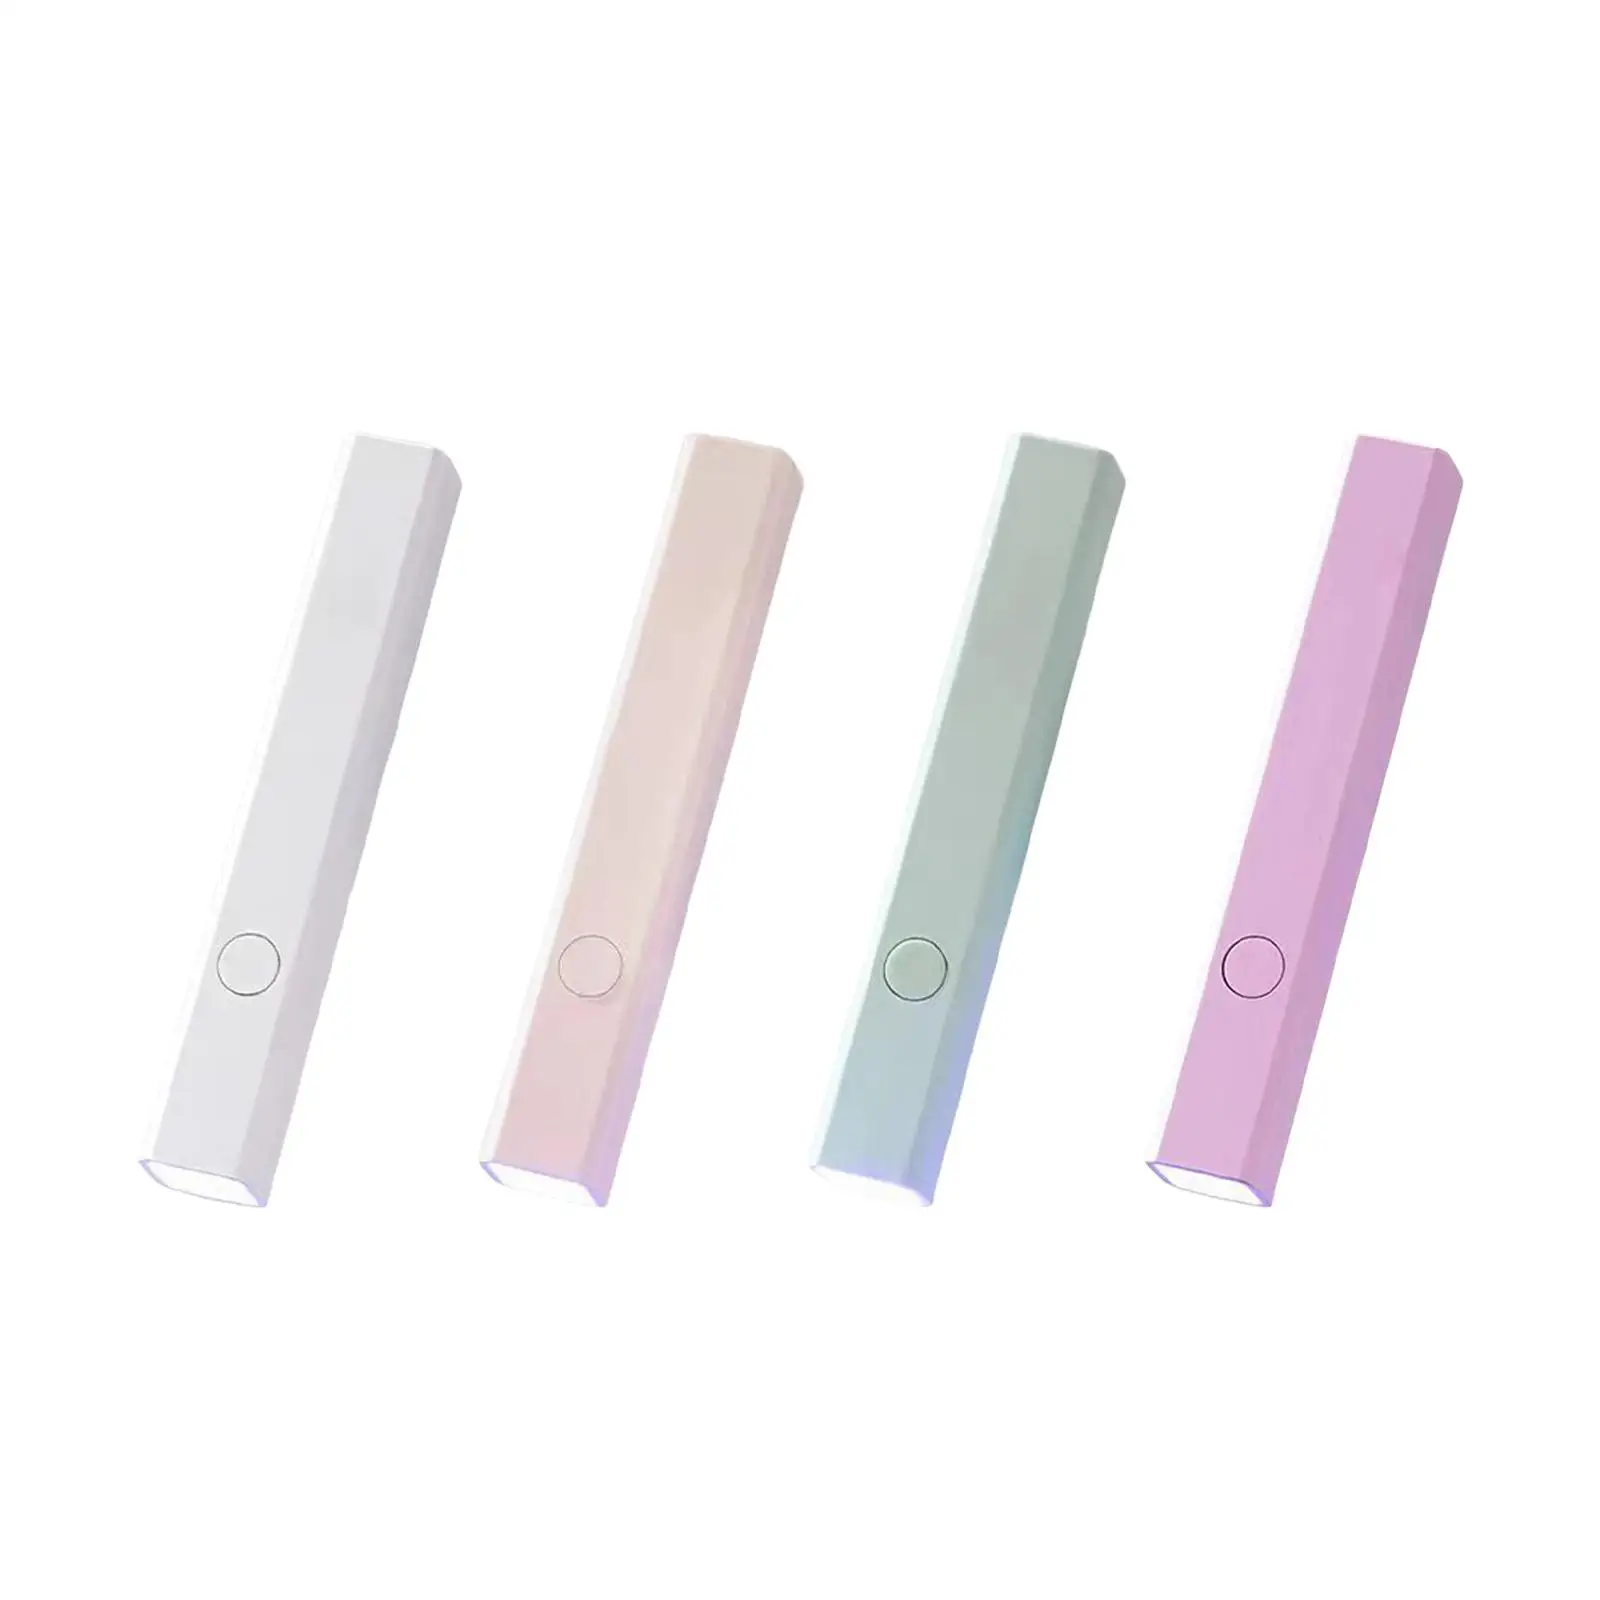 Handheld Nail Lamp Fast Curing Home Tools Small Manicure Lamp